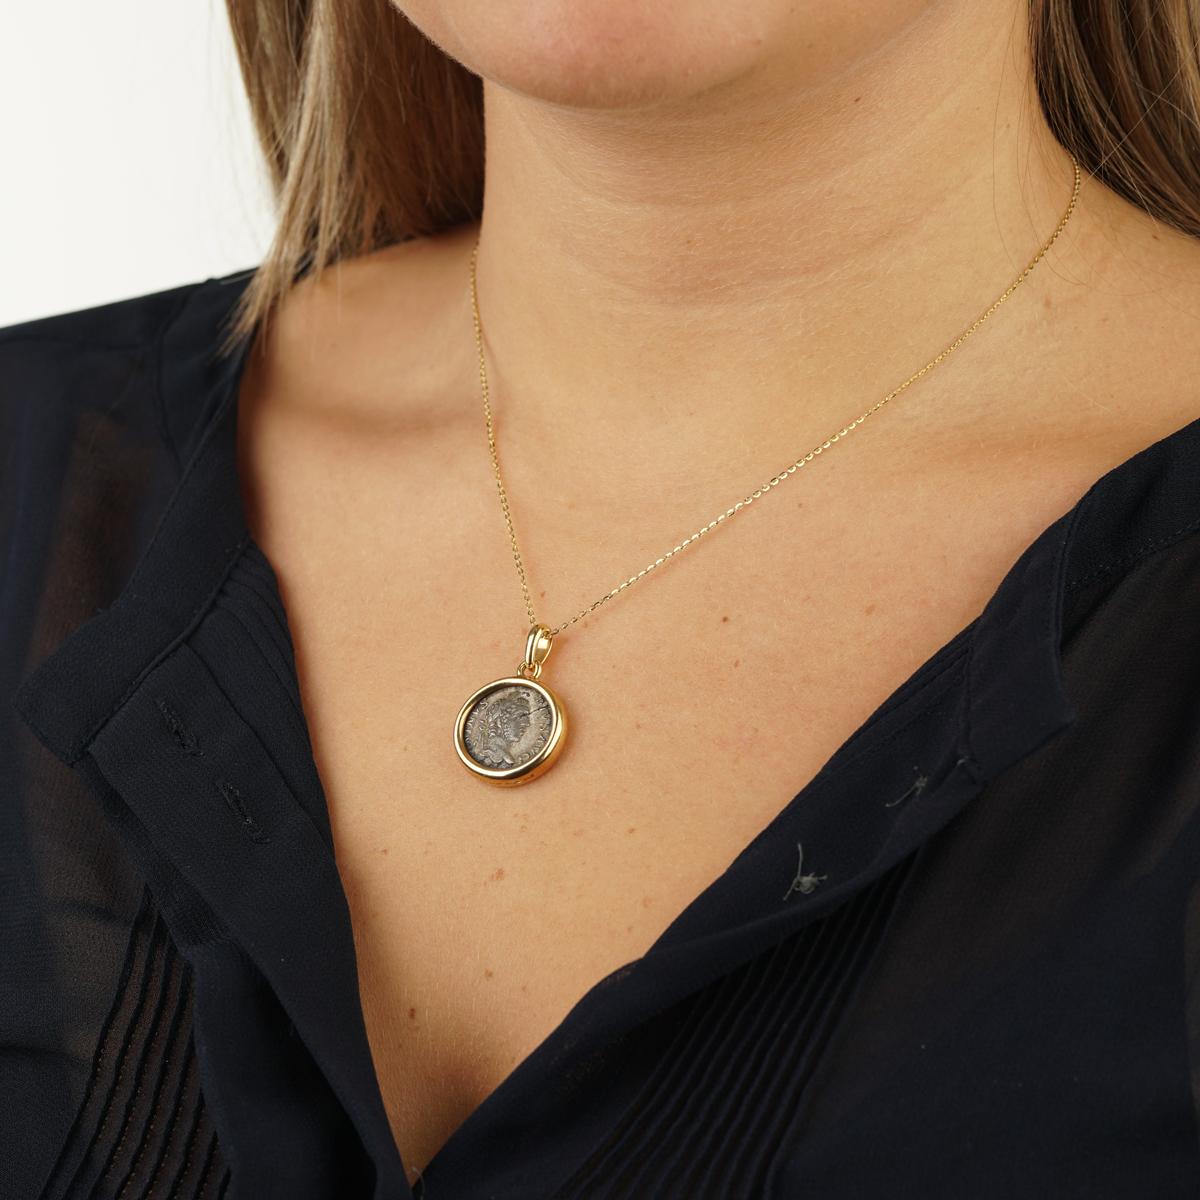 An amazing find from Bulgari showcasing an ancient coin from AD198-217 encased in an 18k yellow gold bezel.

The necklace is not included and is for illustration purposes only.